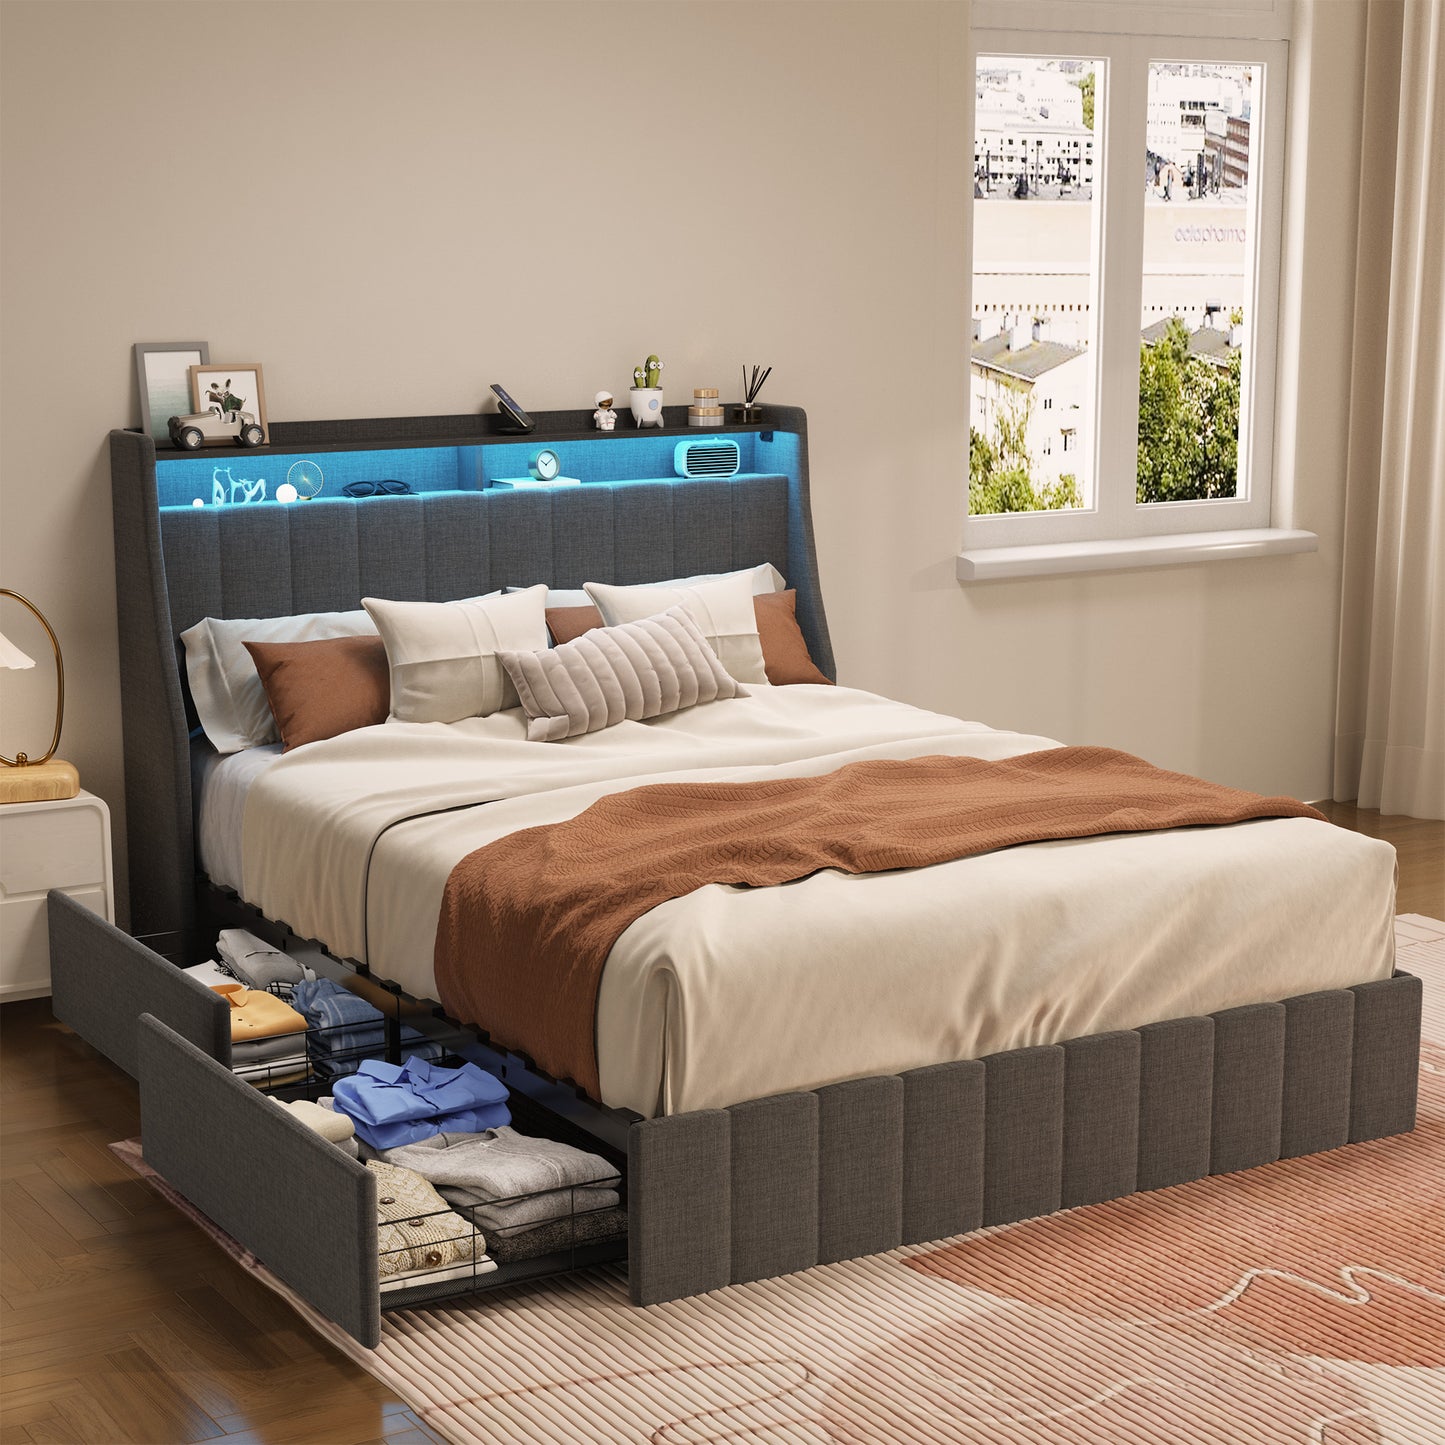 Dark Gray Wood Frame Wings Headboard Queen Platform Bed with LED and 4 Under-bed Portable Storage Drawers